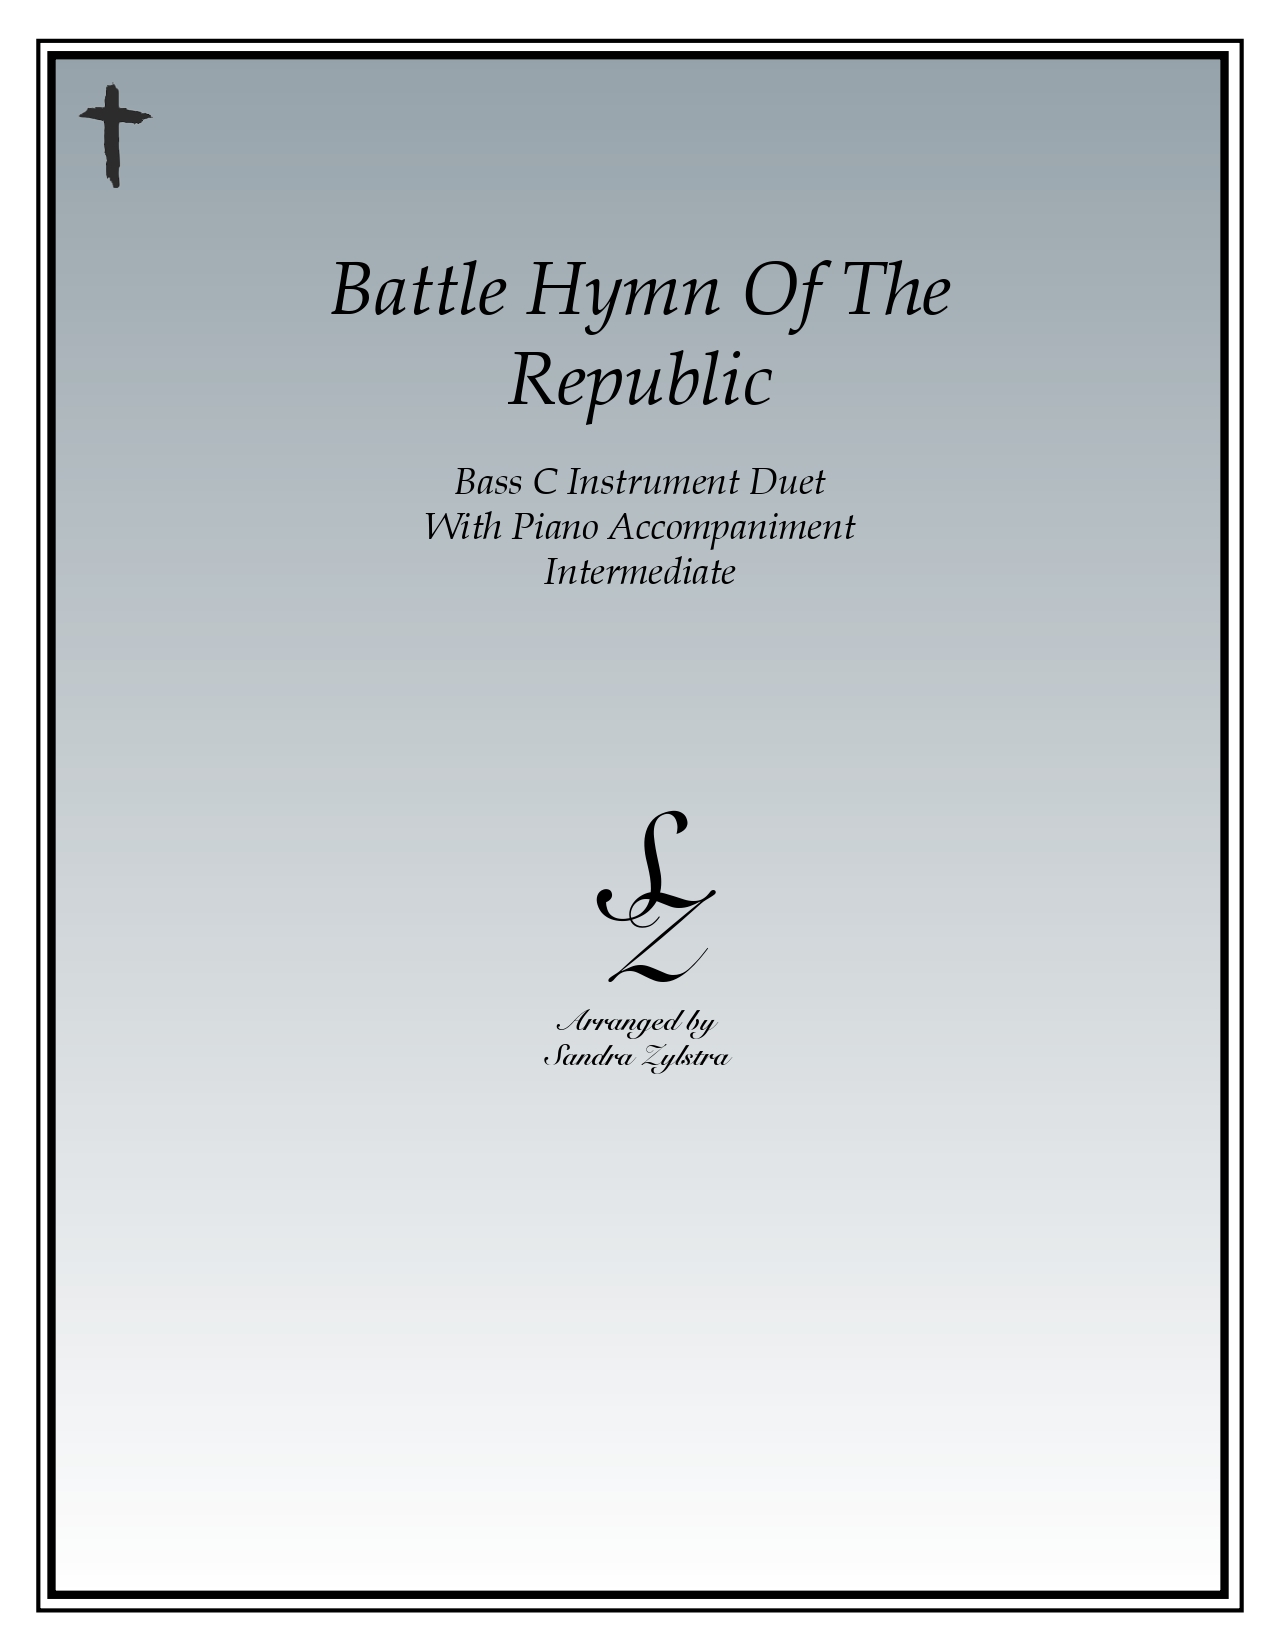 Battle Hymn Of The Republic bass C instrument duet parts cover page 00011